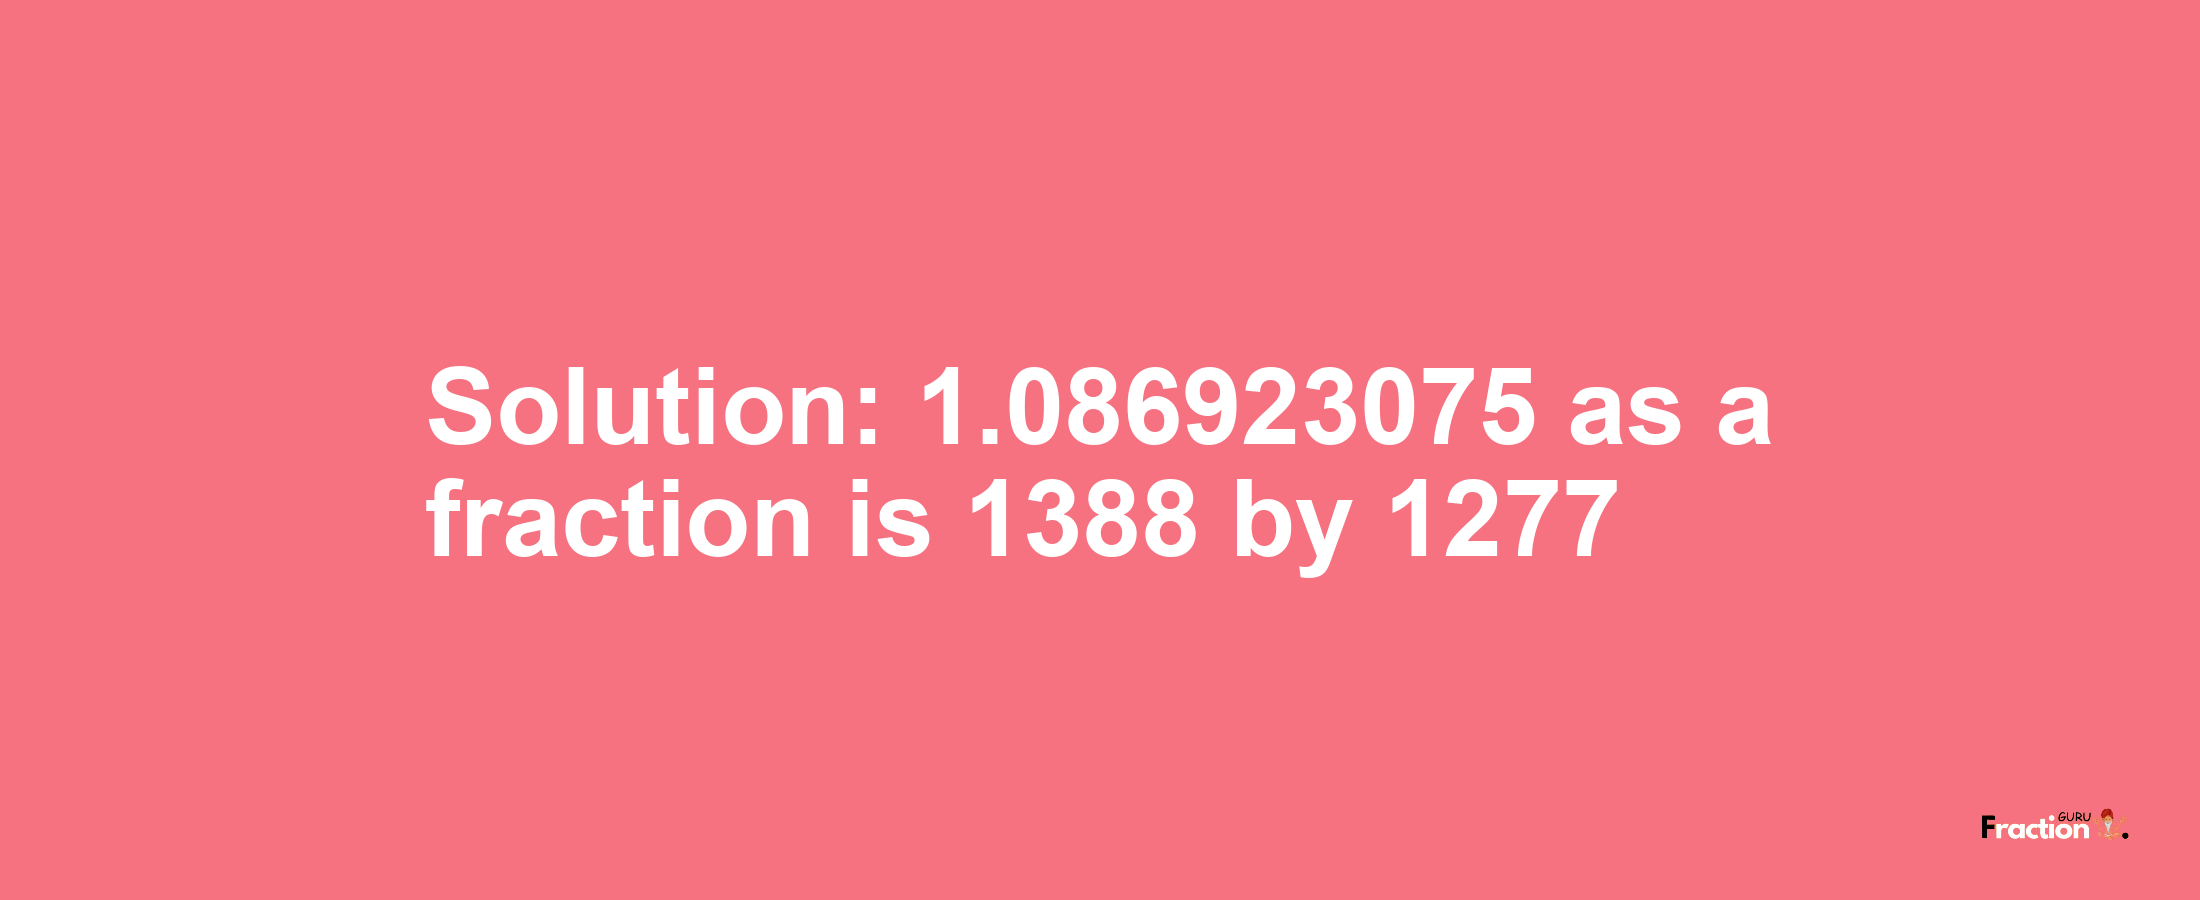 Solution:1.086923075 as a fraction is 1388/1277